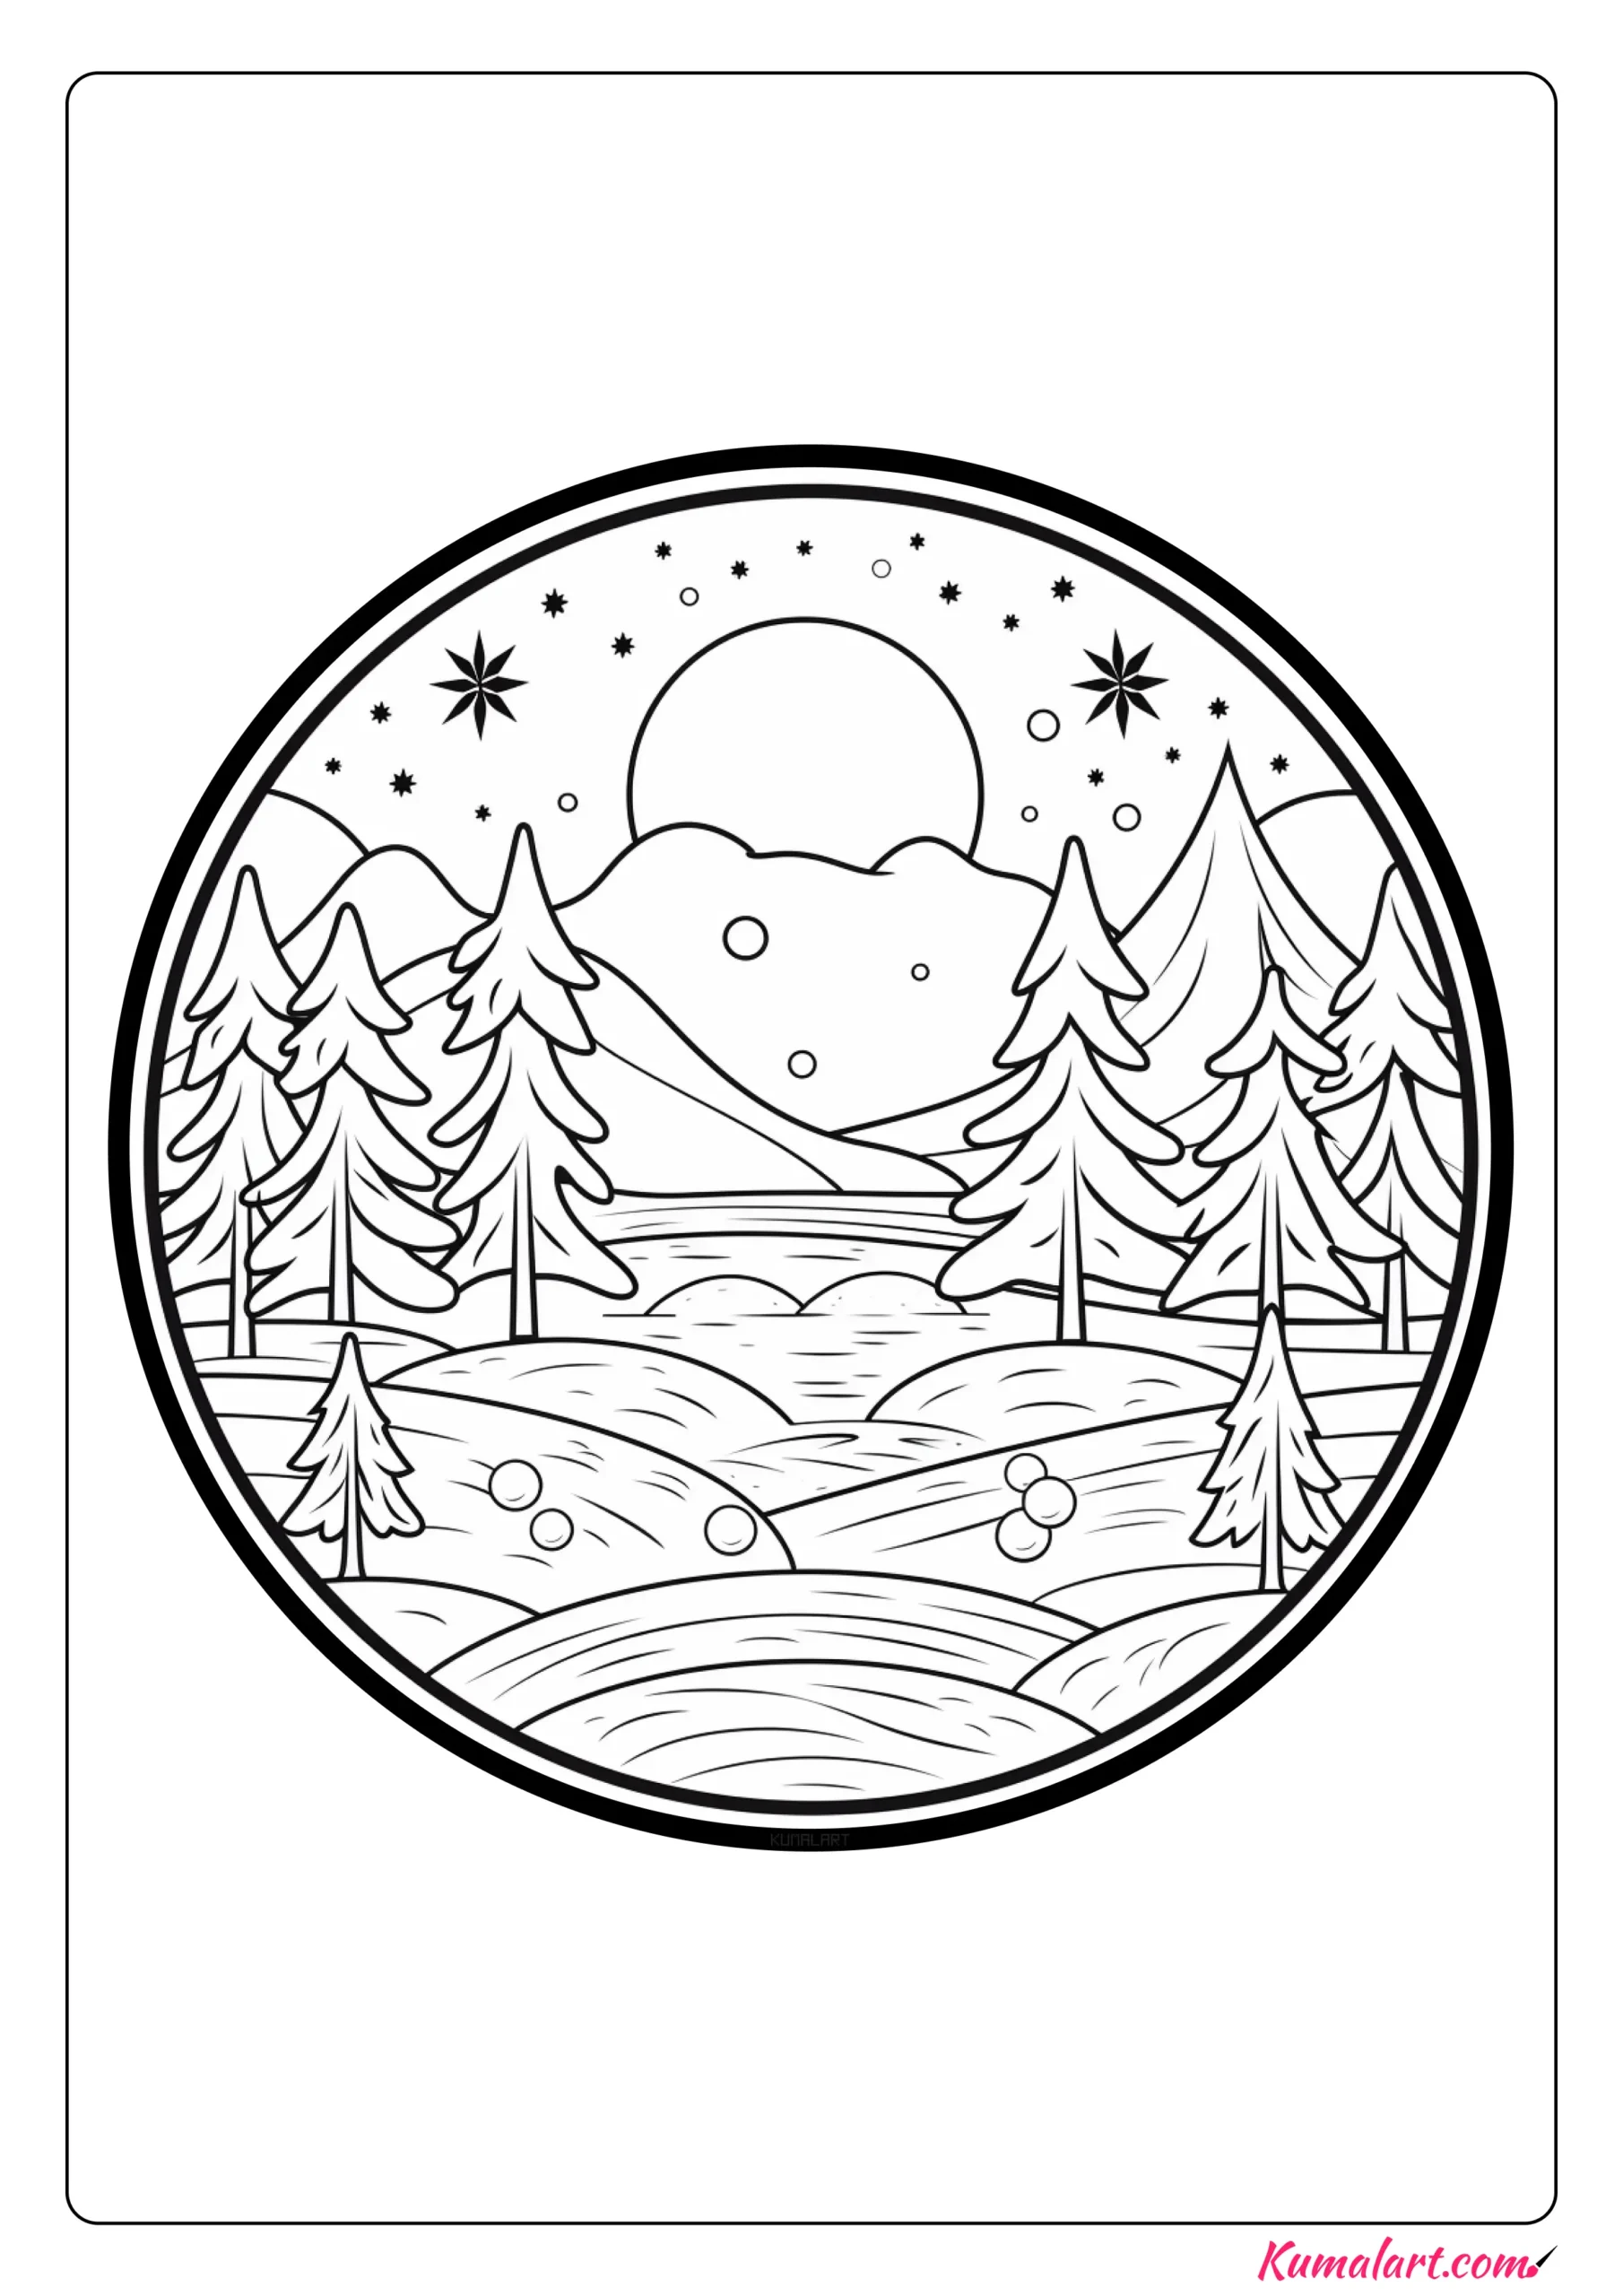 Chilly Winter Mandala Coloring Page